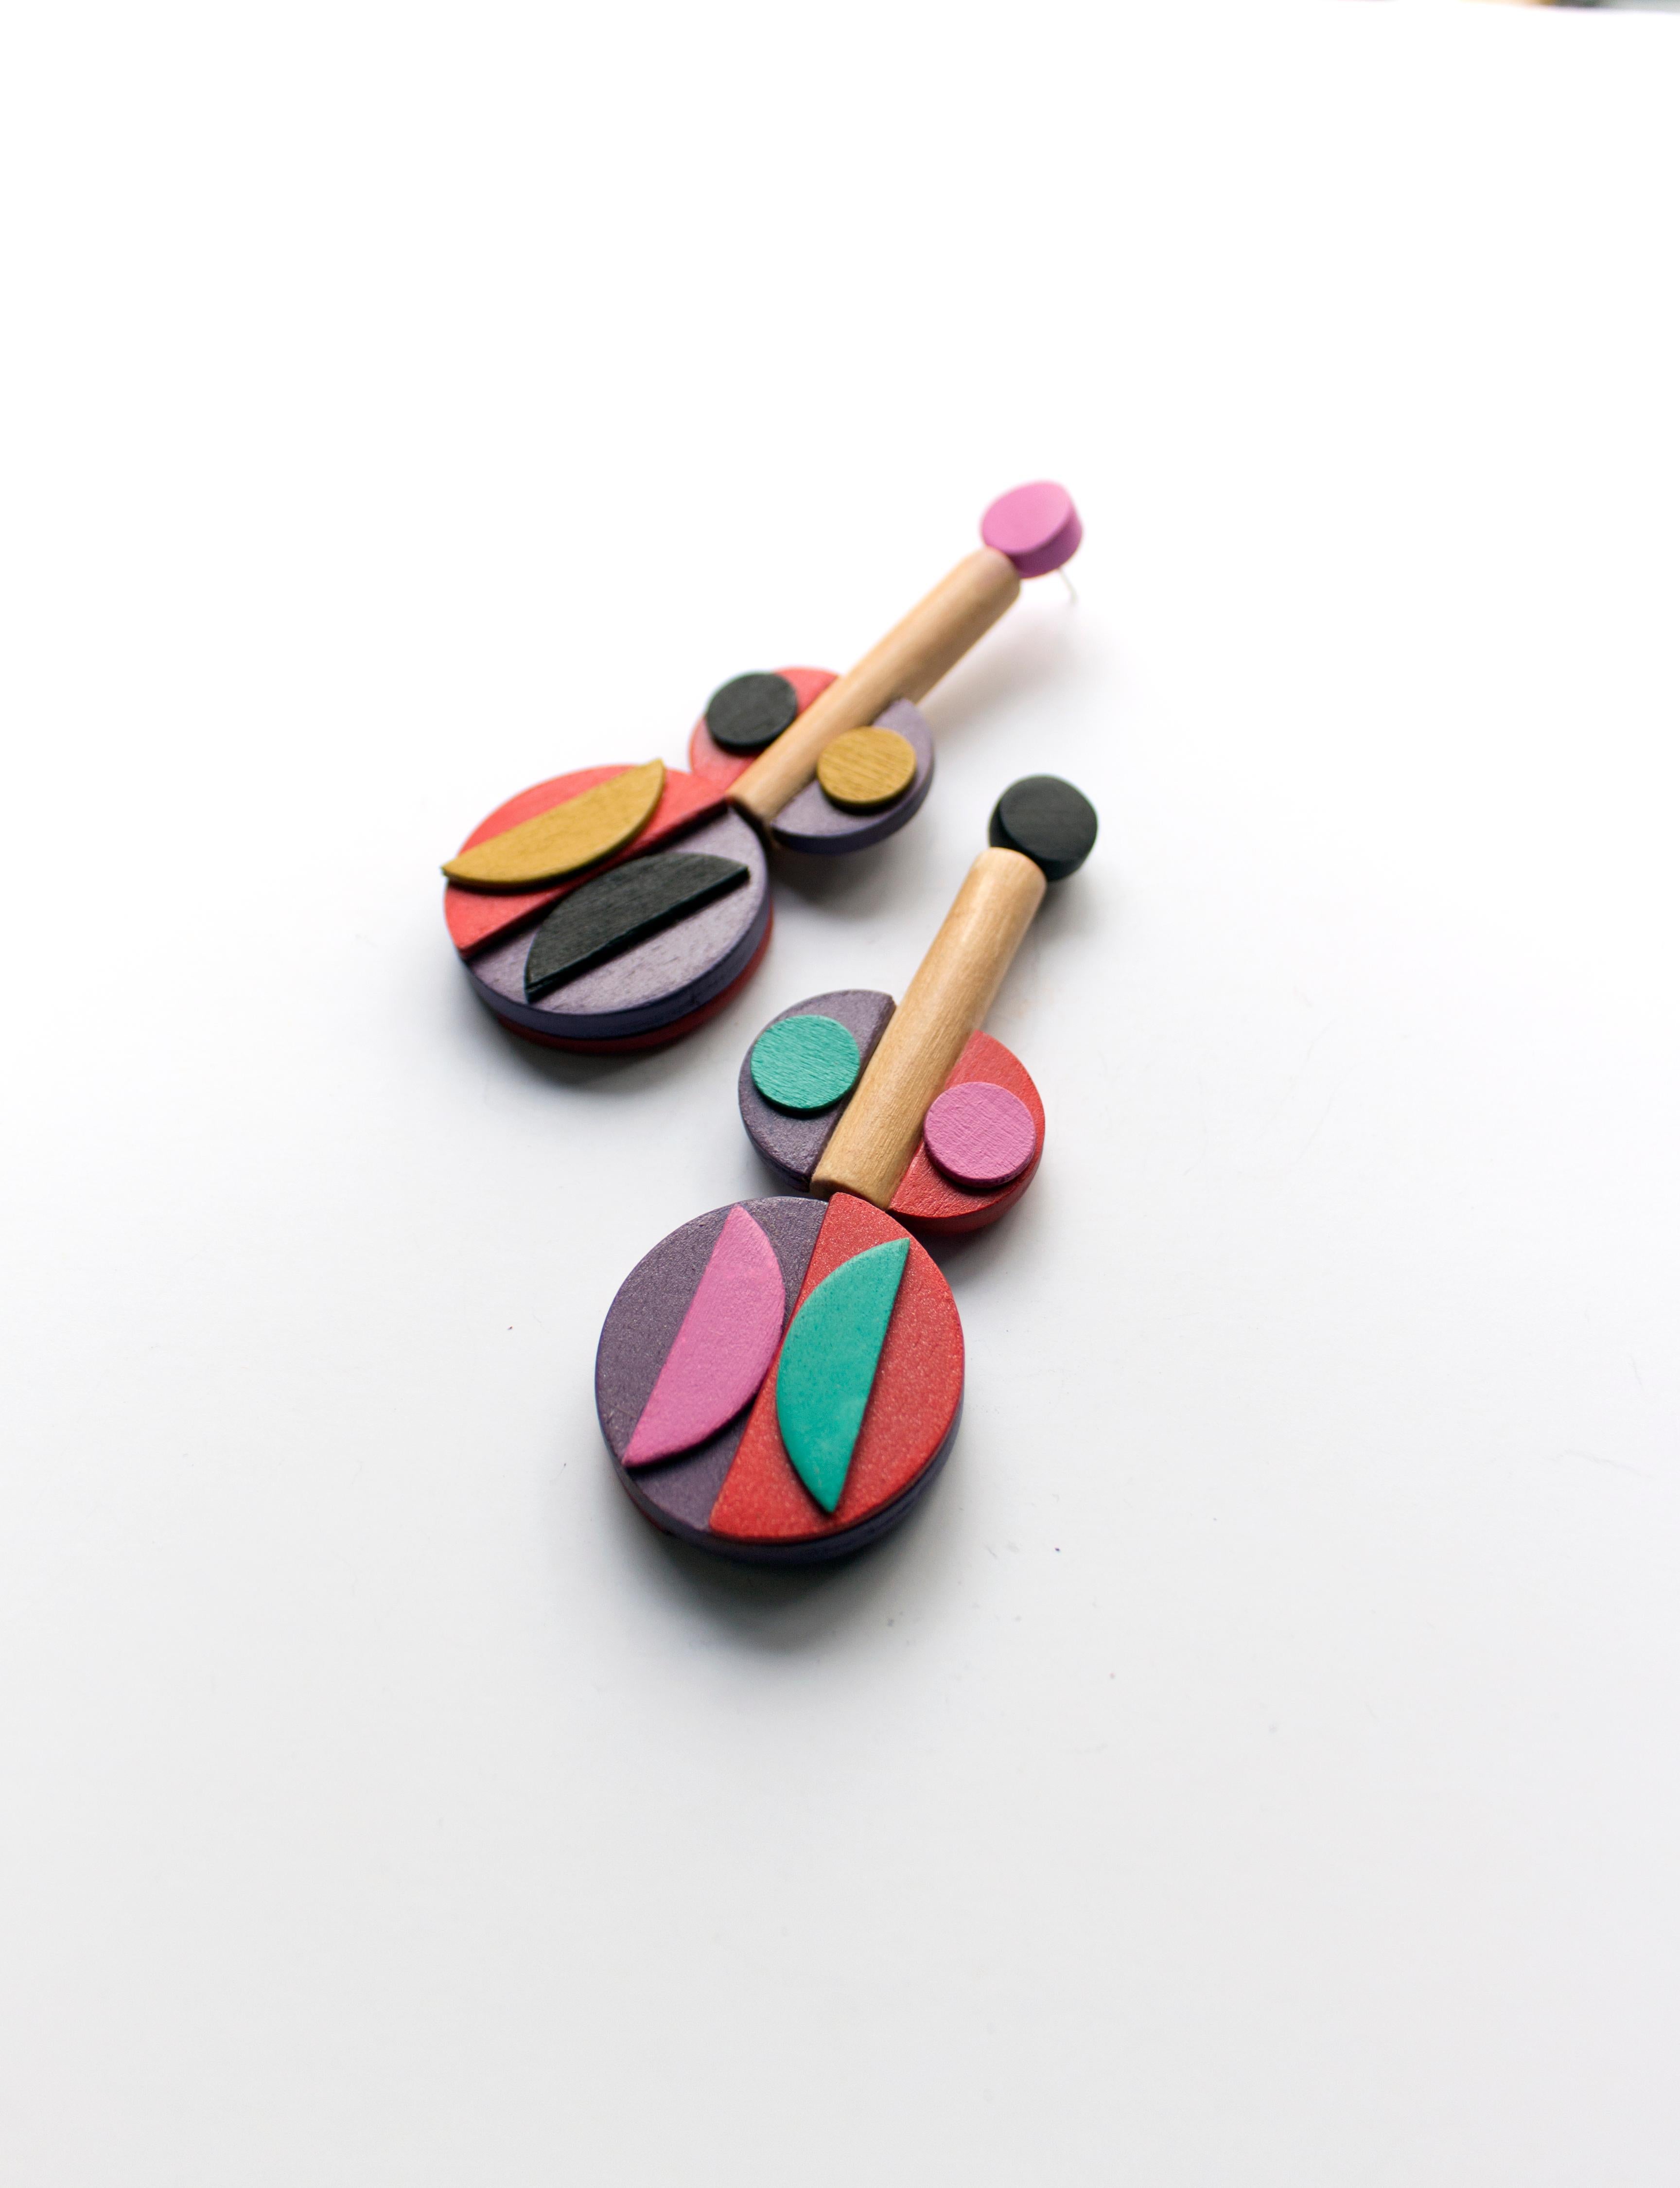 Large geometric Bauhaus-inspired wood dangle earrings of individually hand-cut and hand-painted shapes using a playful palette of bold, vivid colors.  Hypoallergenic stainless steel posts. 

All Hola Luna pieces are handcrafted one-off designs made